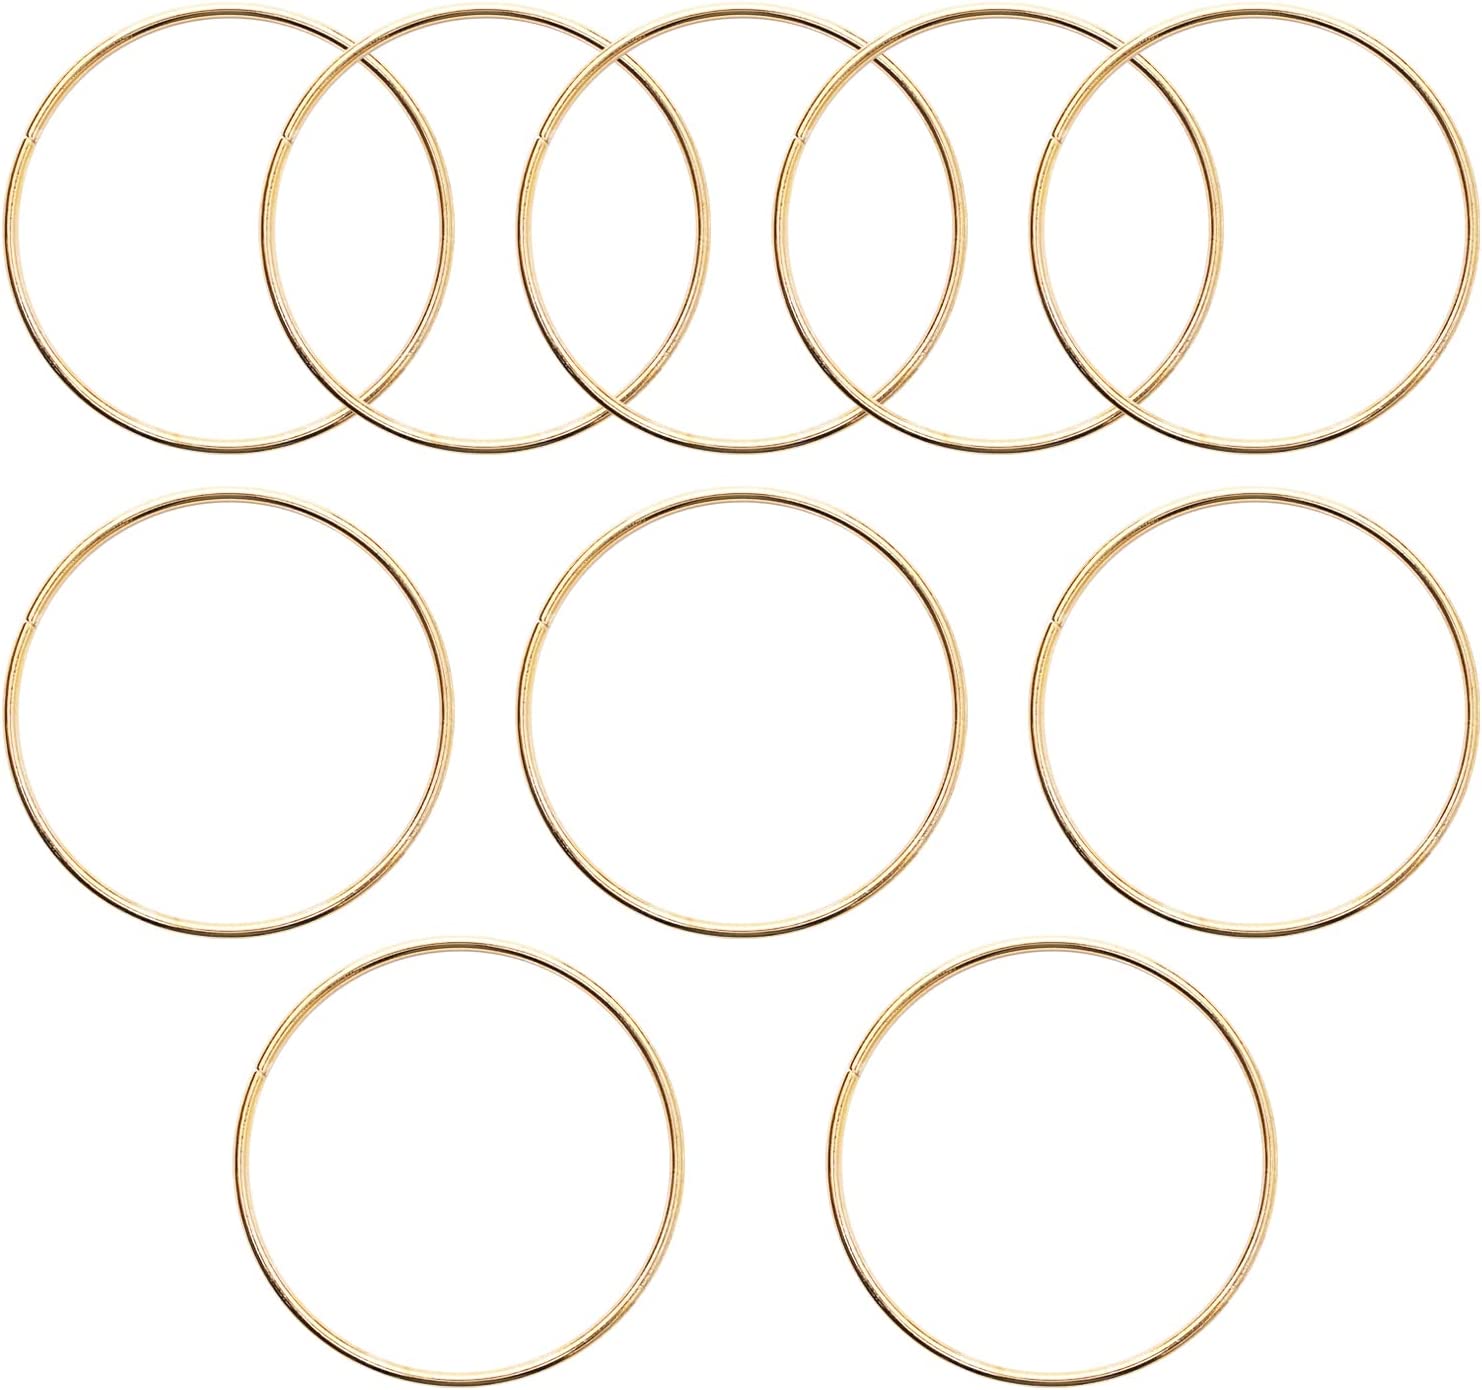 Coceca 10pcs 6 inch Gold Dream Catcher Metal Rings Metal Hoops for Dream Catcher and Crafts